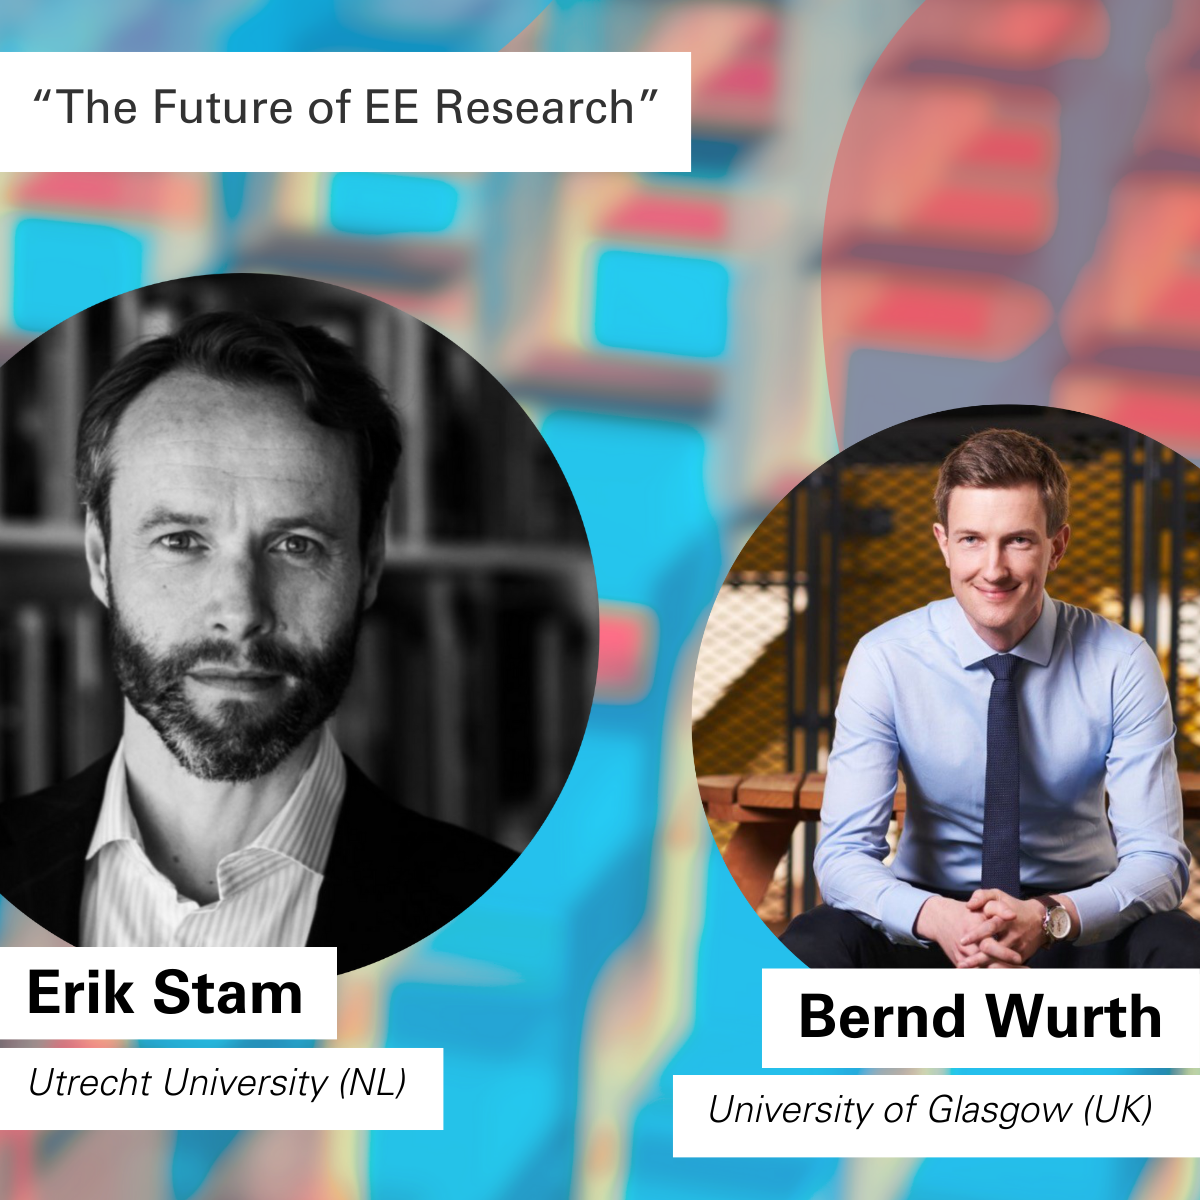 On the Topic "The Future of EE Research", we welcome Erik Stam (Utrecht University, NL) and Bernd Wurth (University of Glasgow, UK).